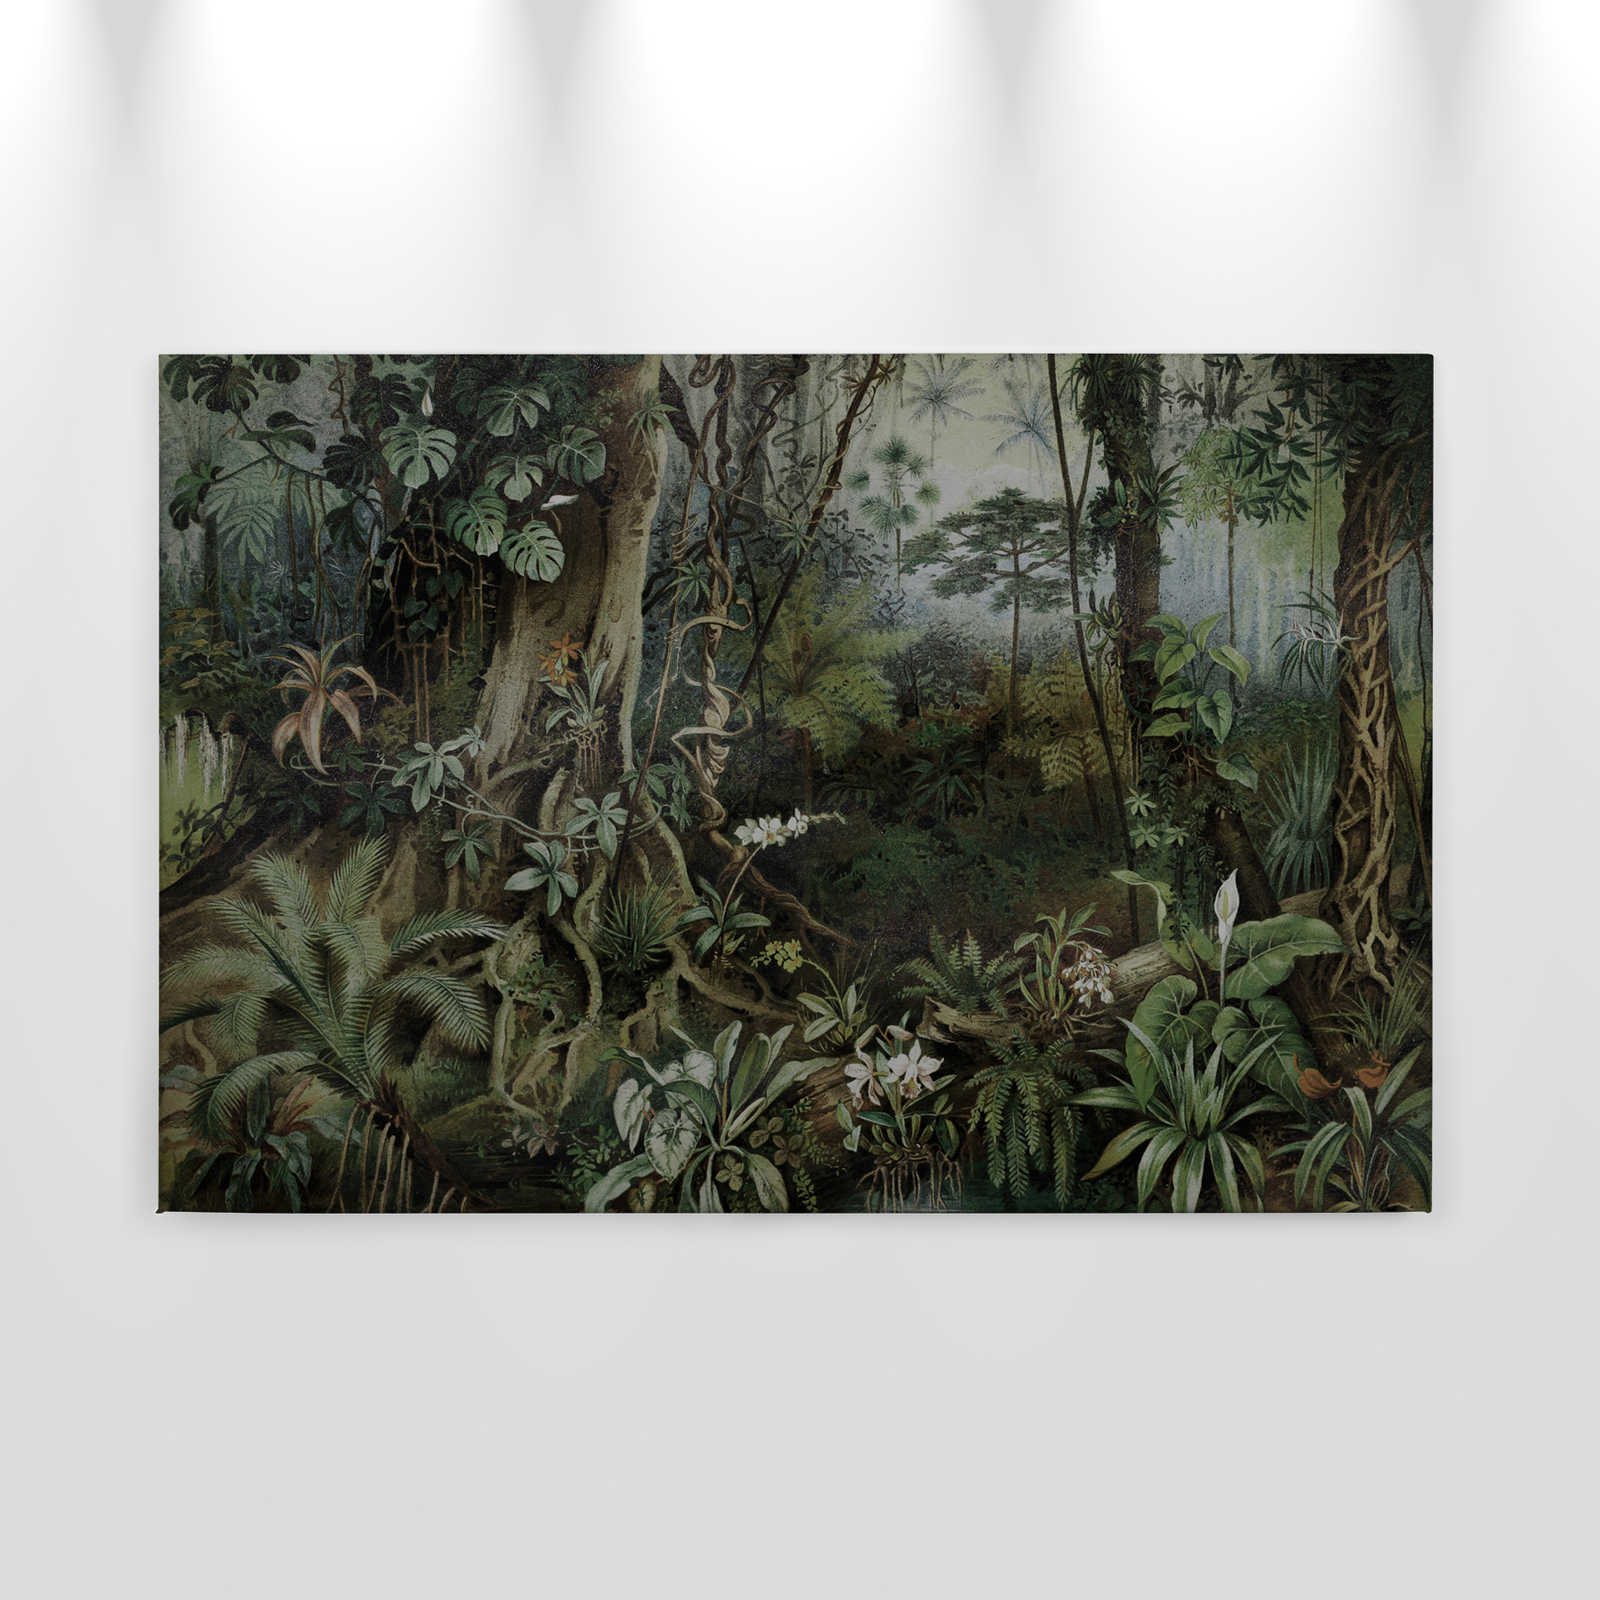             Jungle canvas picture in drawing style | walls by patel - 0,90 m x 0,60 m
        